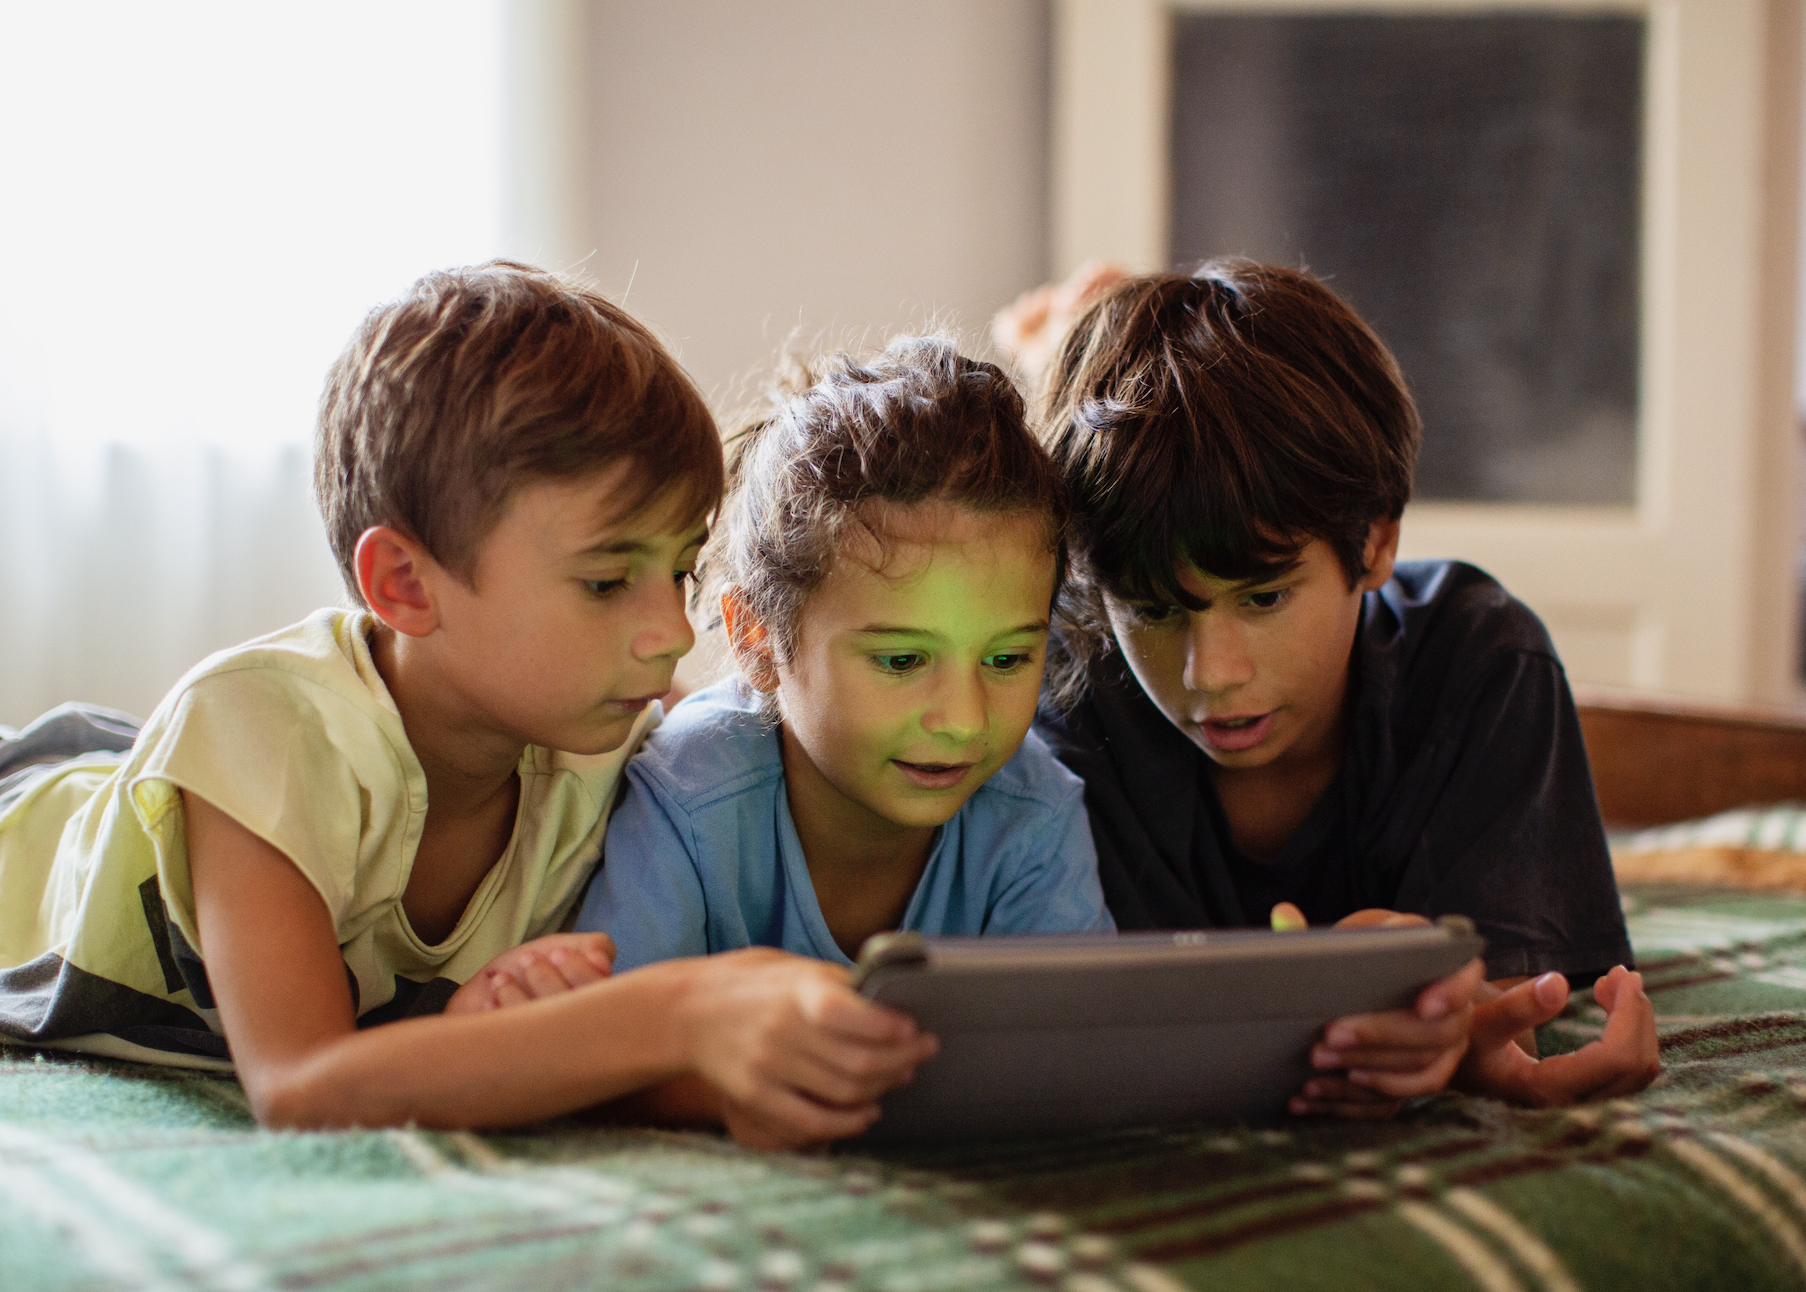 Three children are lying on a bed, sharing and focusing on a tablet screen together